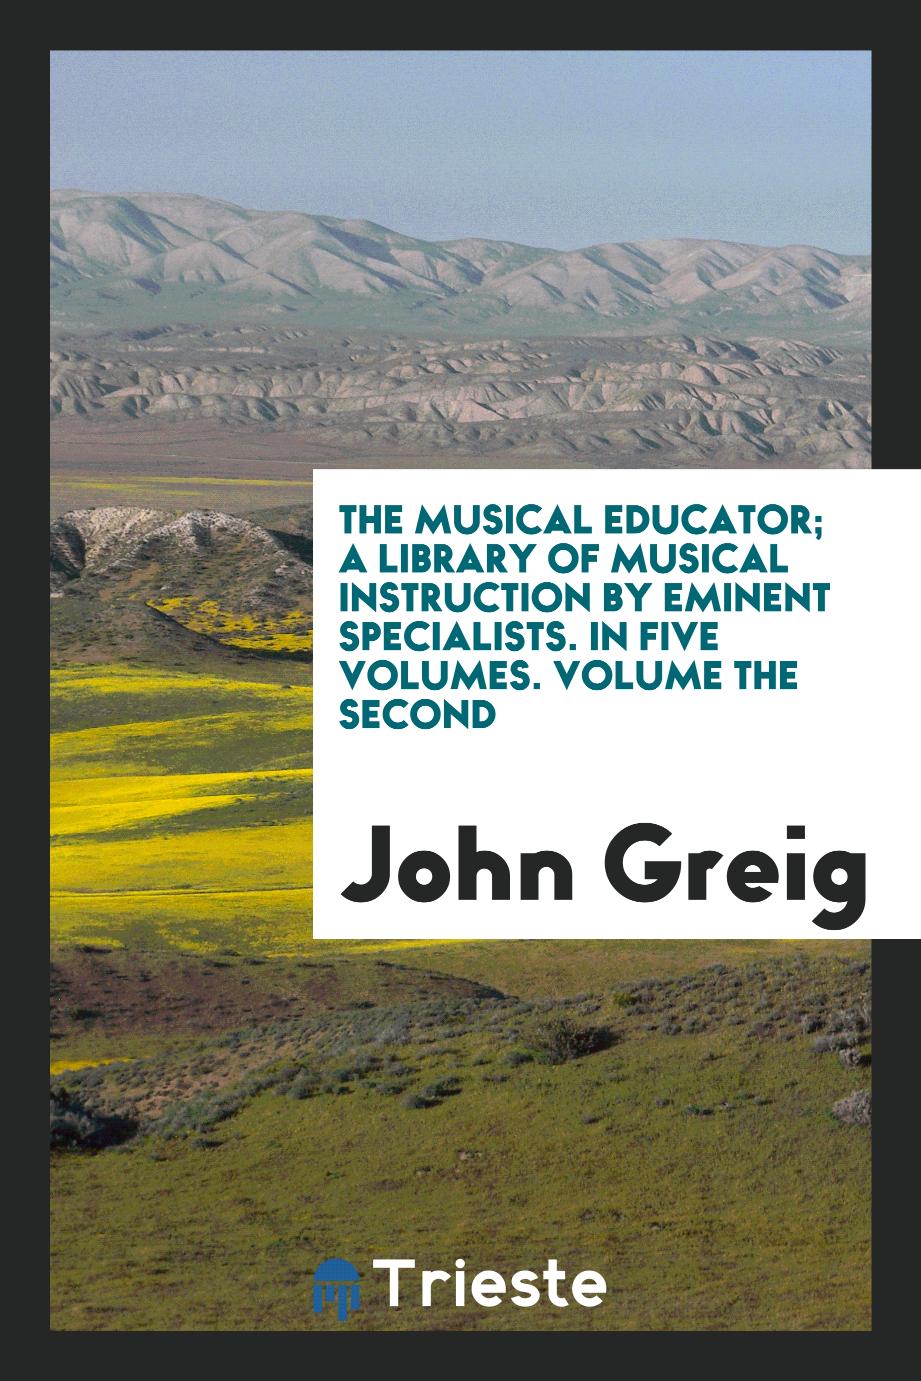 The musical educator; a library of musical instruction by eminent specialists. In five volumes. Volume the second